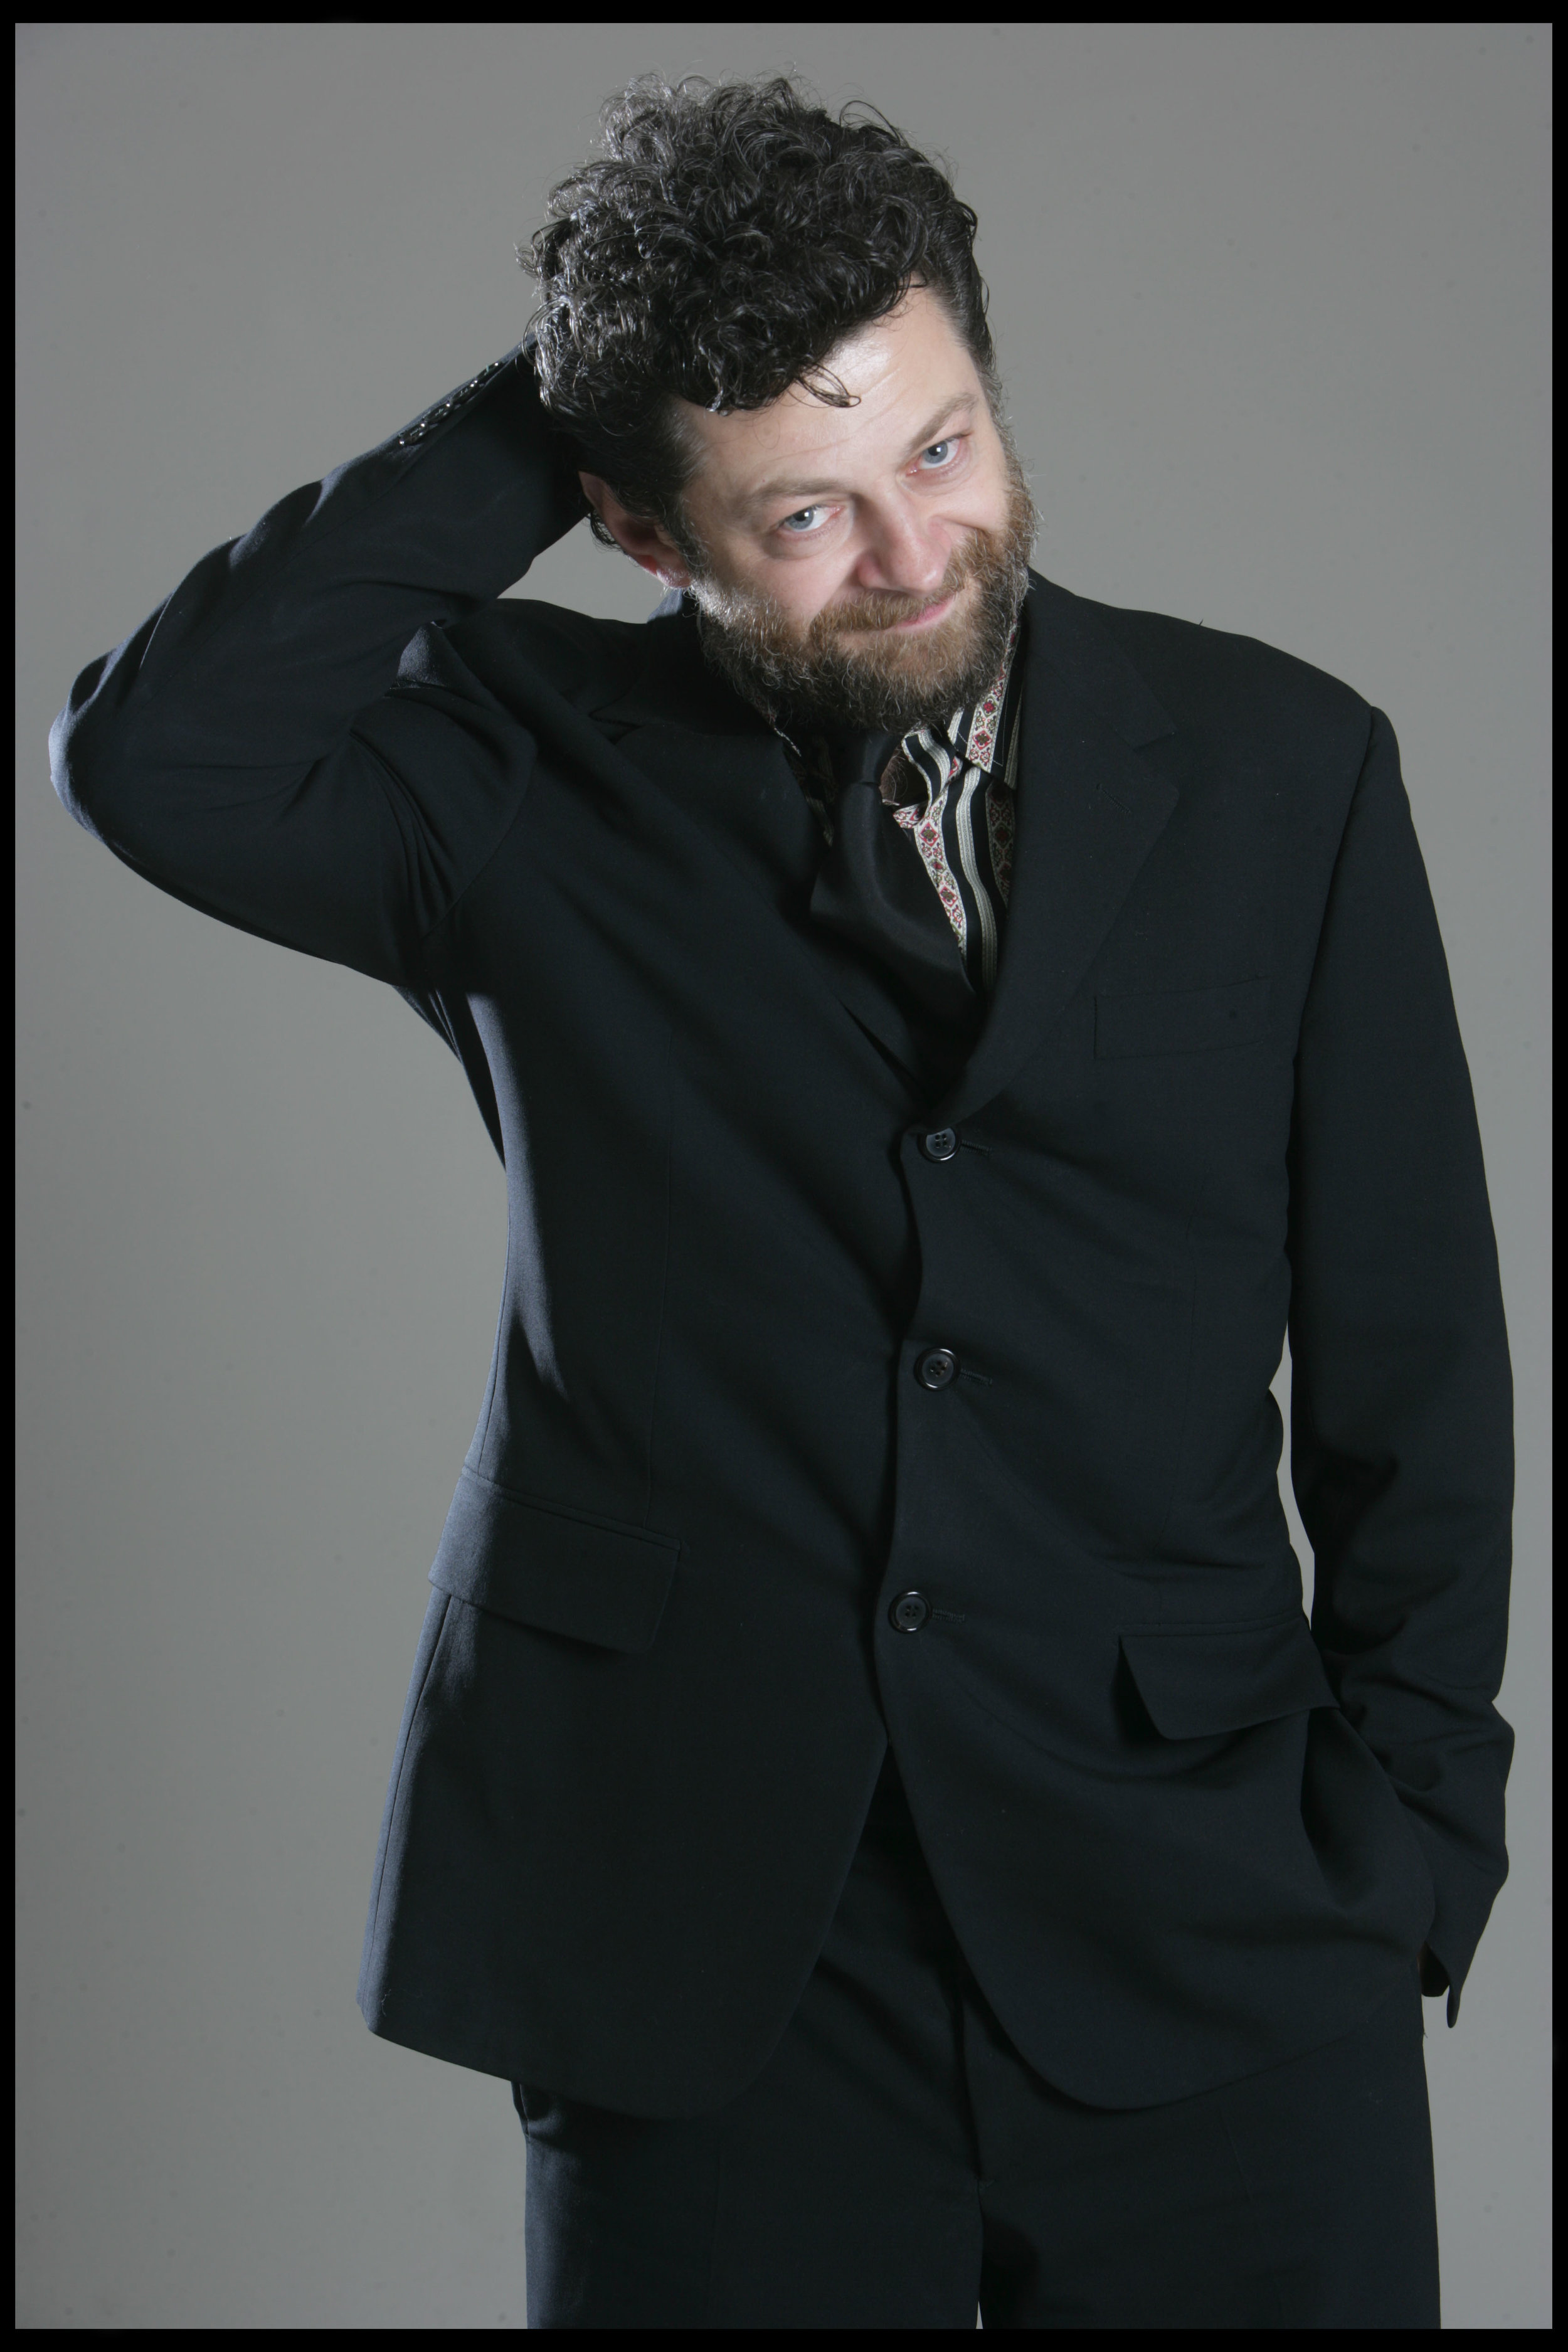 Andy Serkis, actor